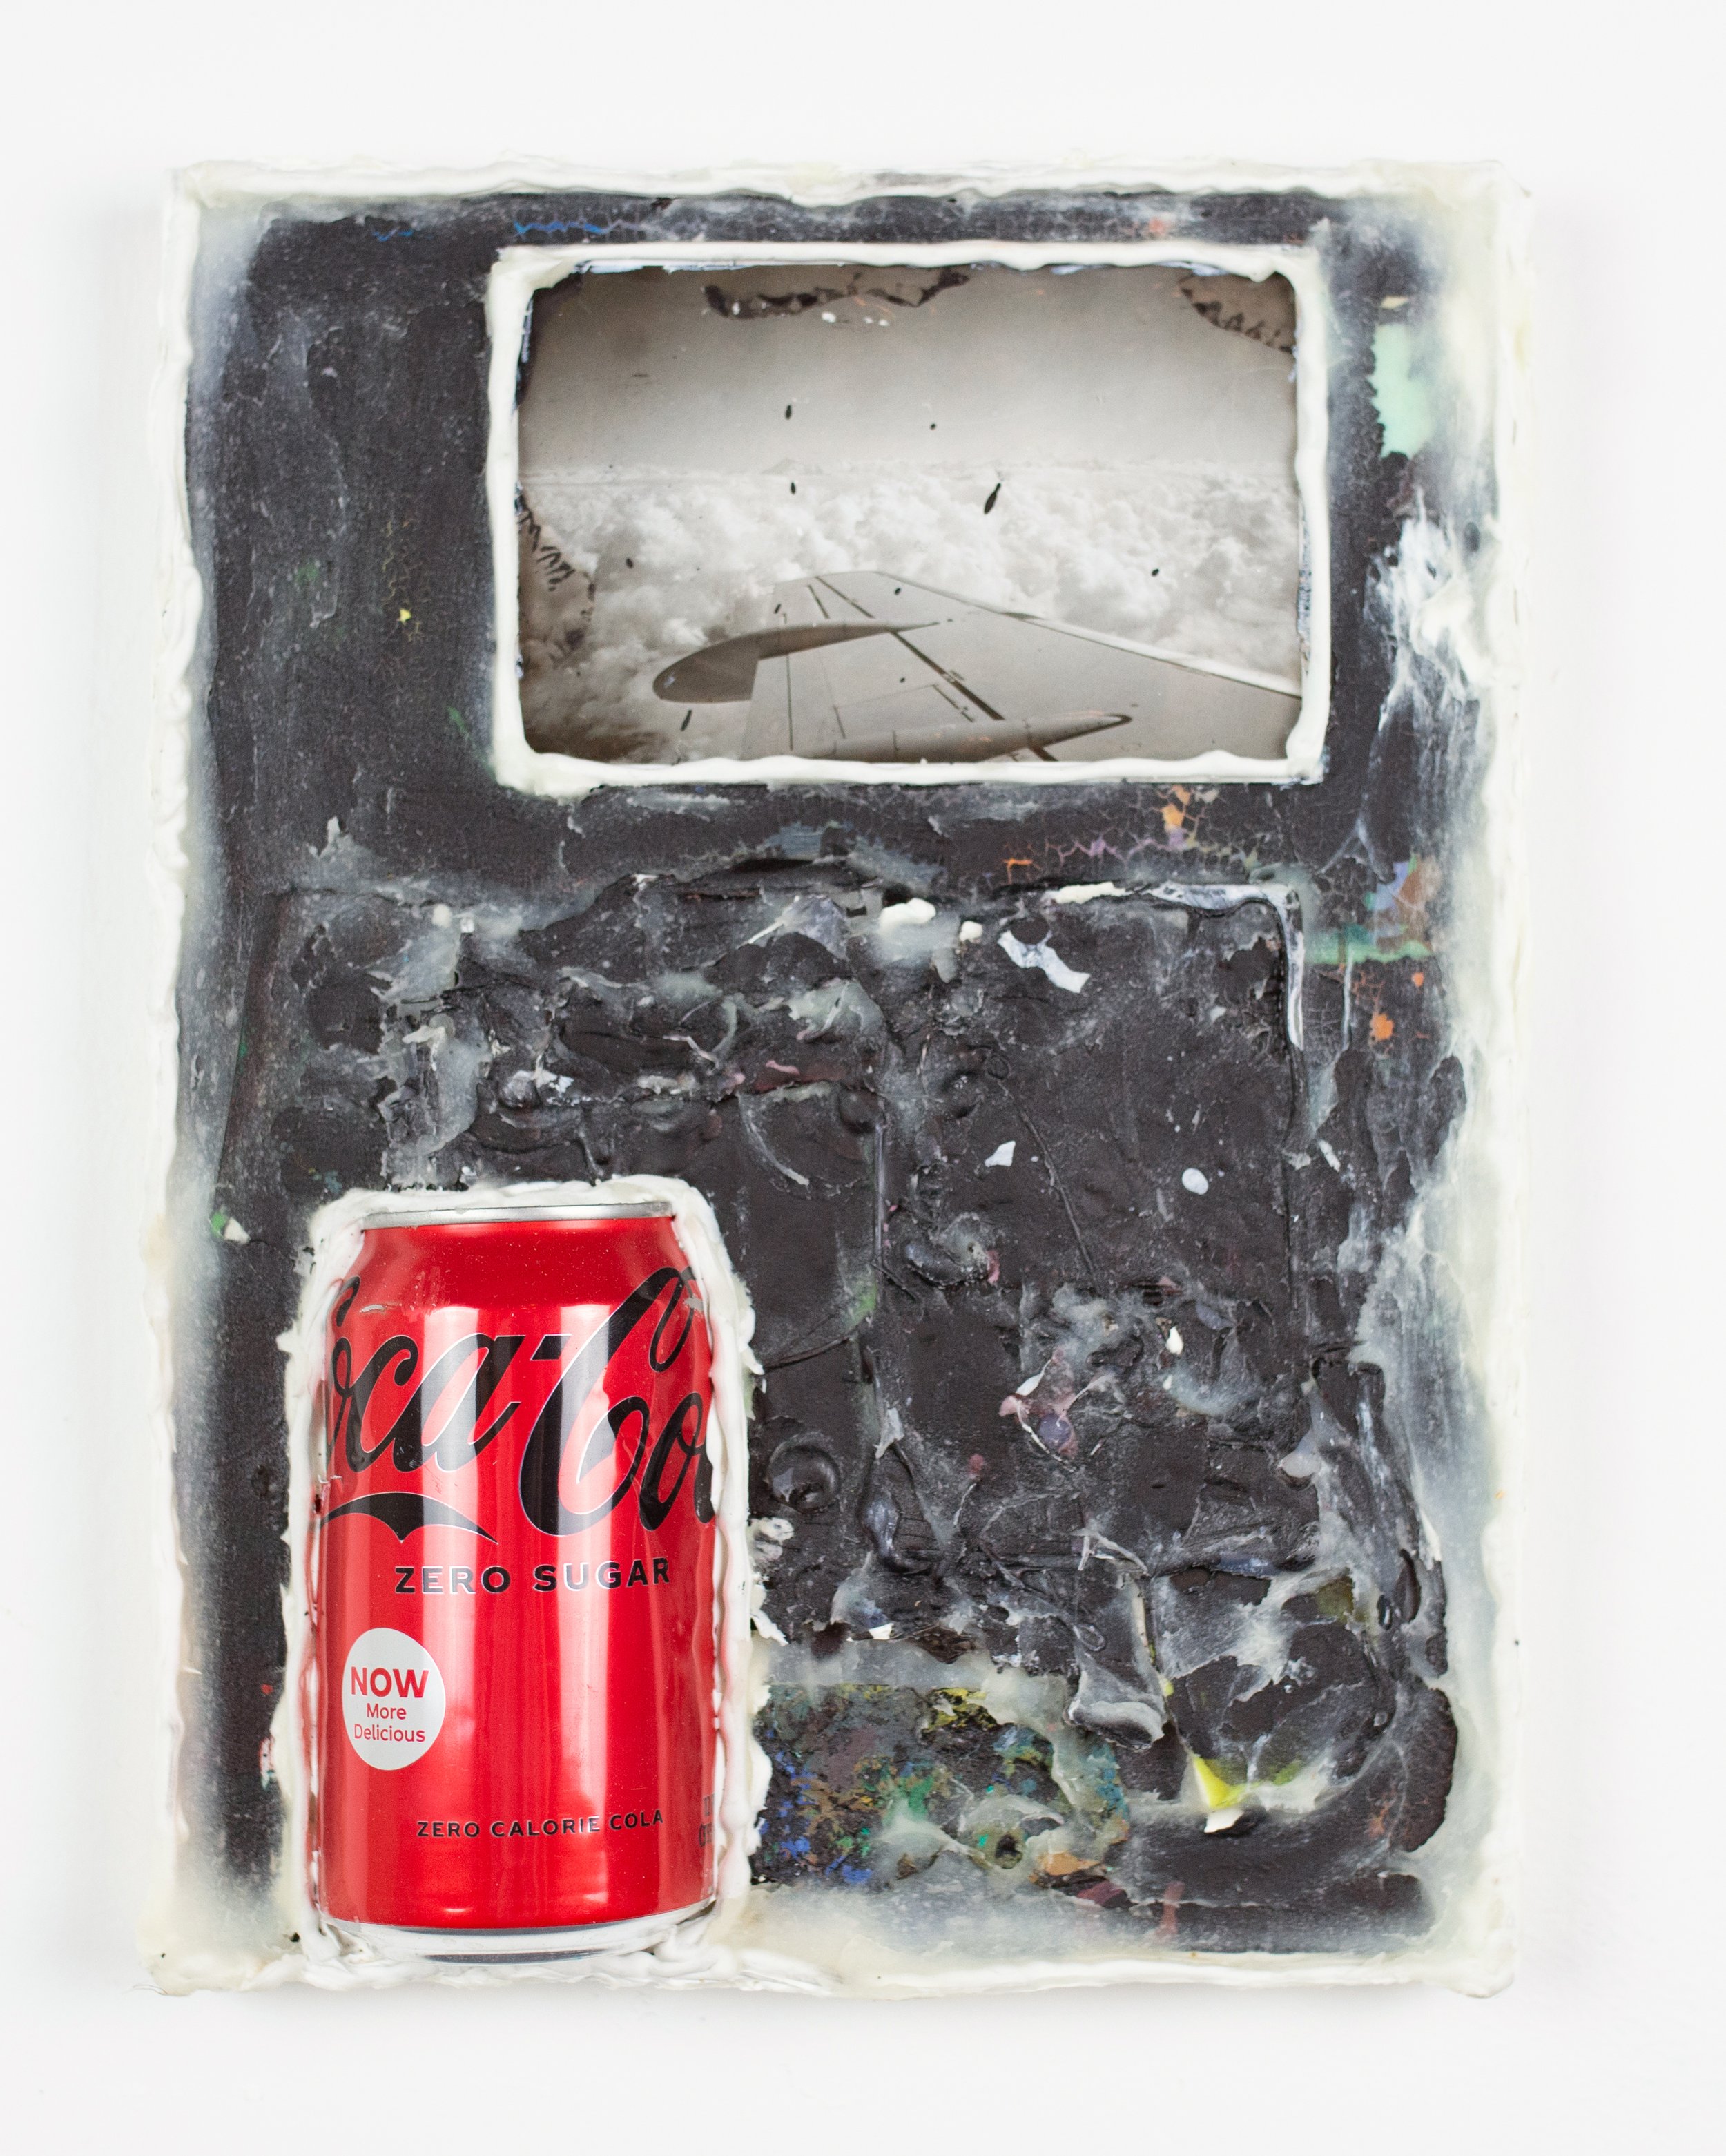    Somewhere Over The Amazon    Oil, acrylic, Sumi ink, family photograph, caulk, cold wax, Coke Zero can mounted on panel    12 x 9 in.       